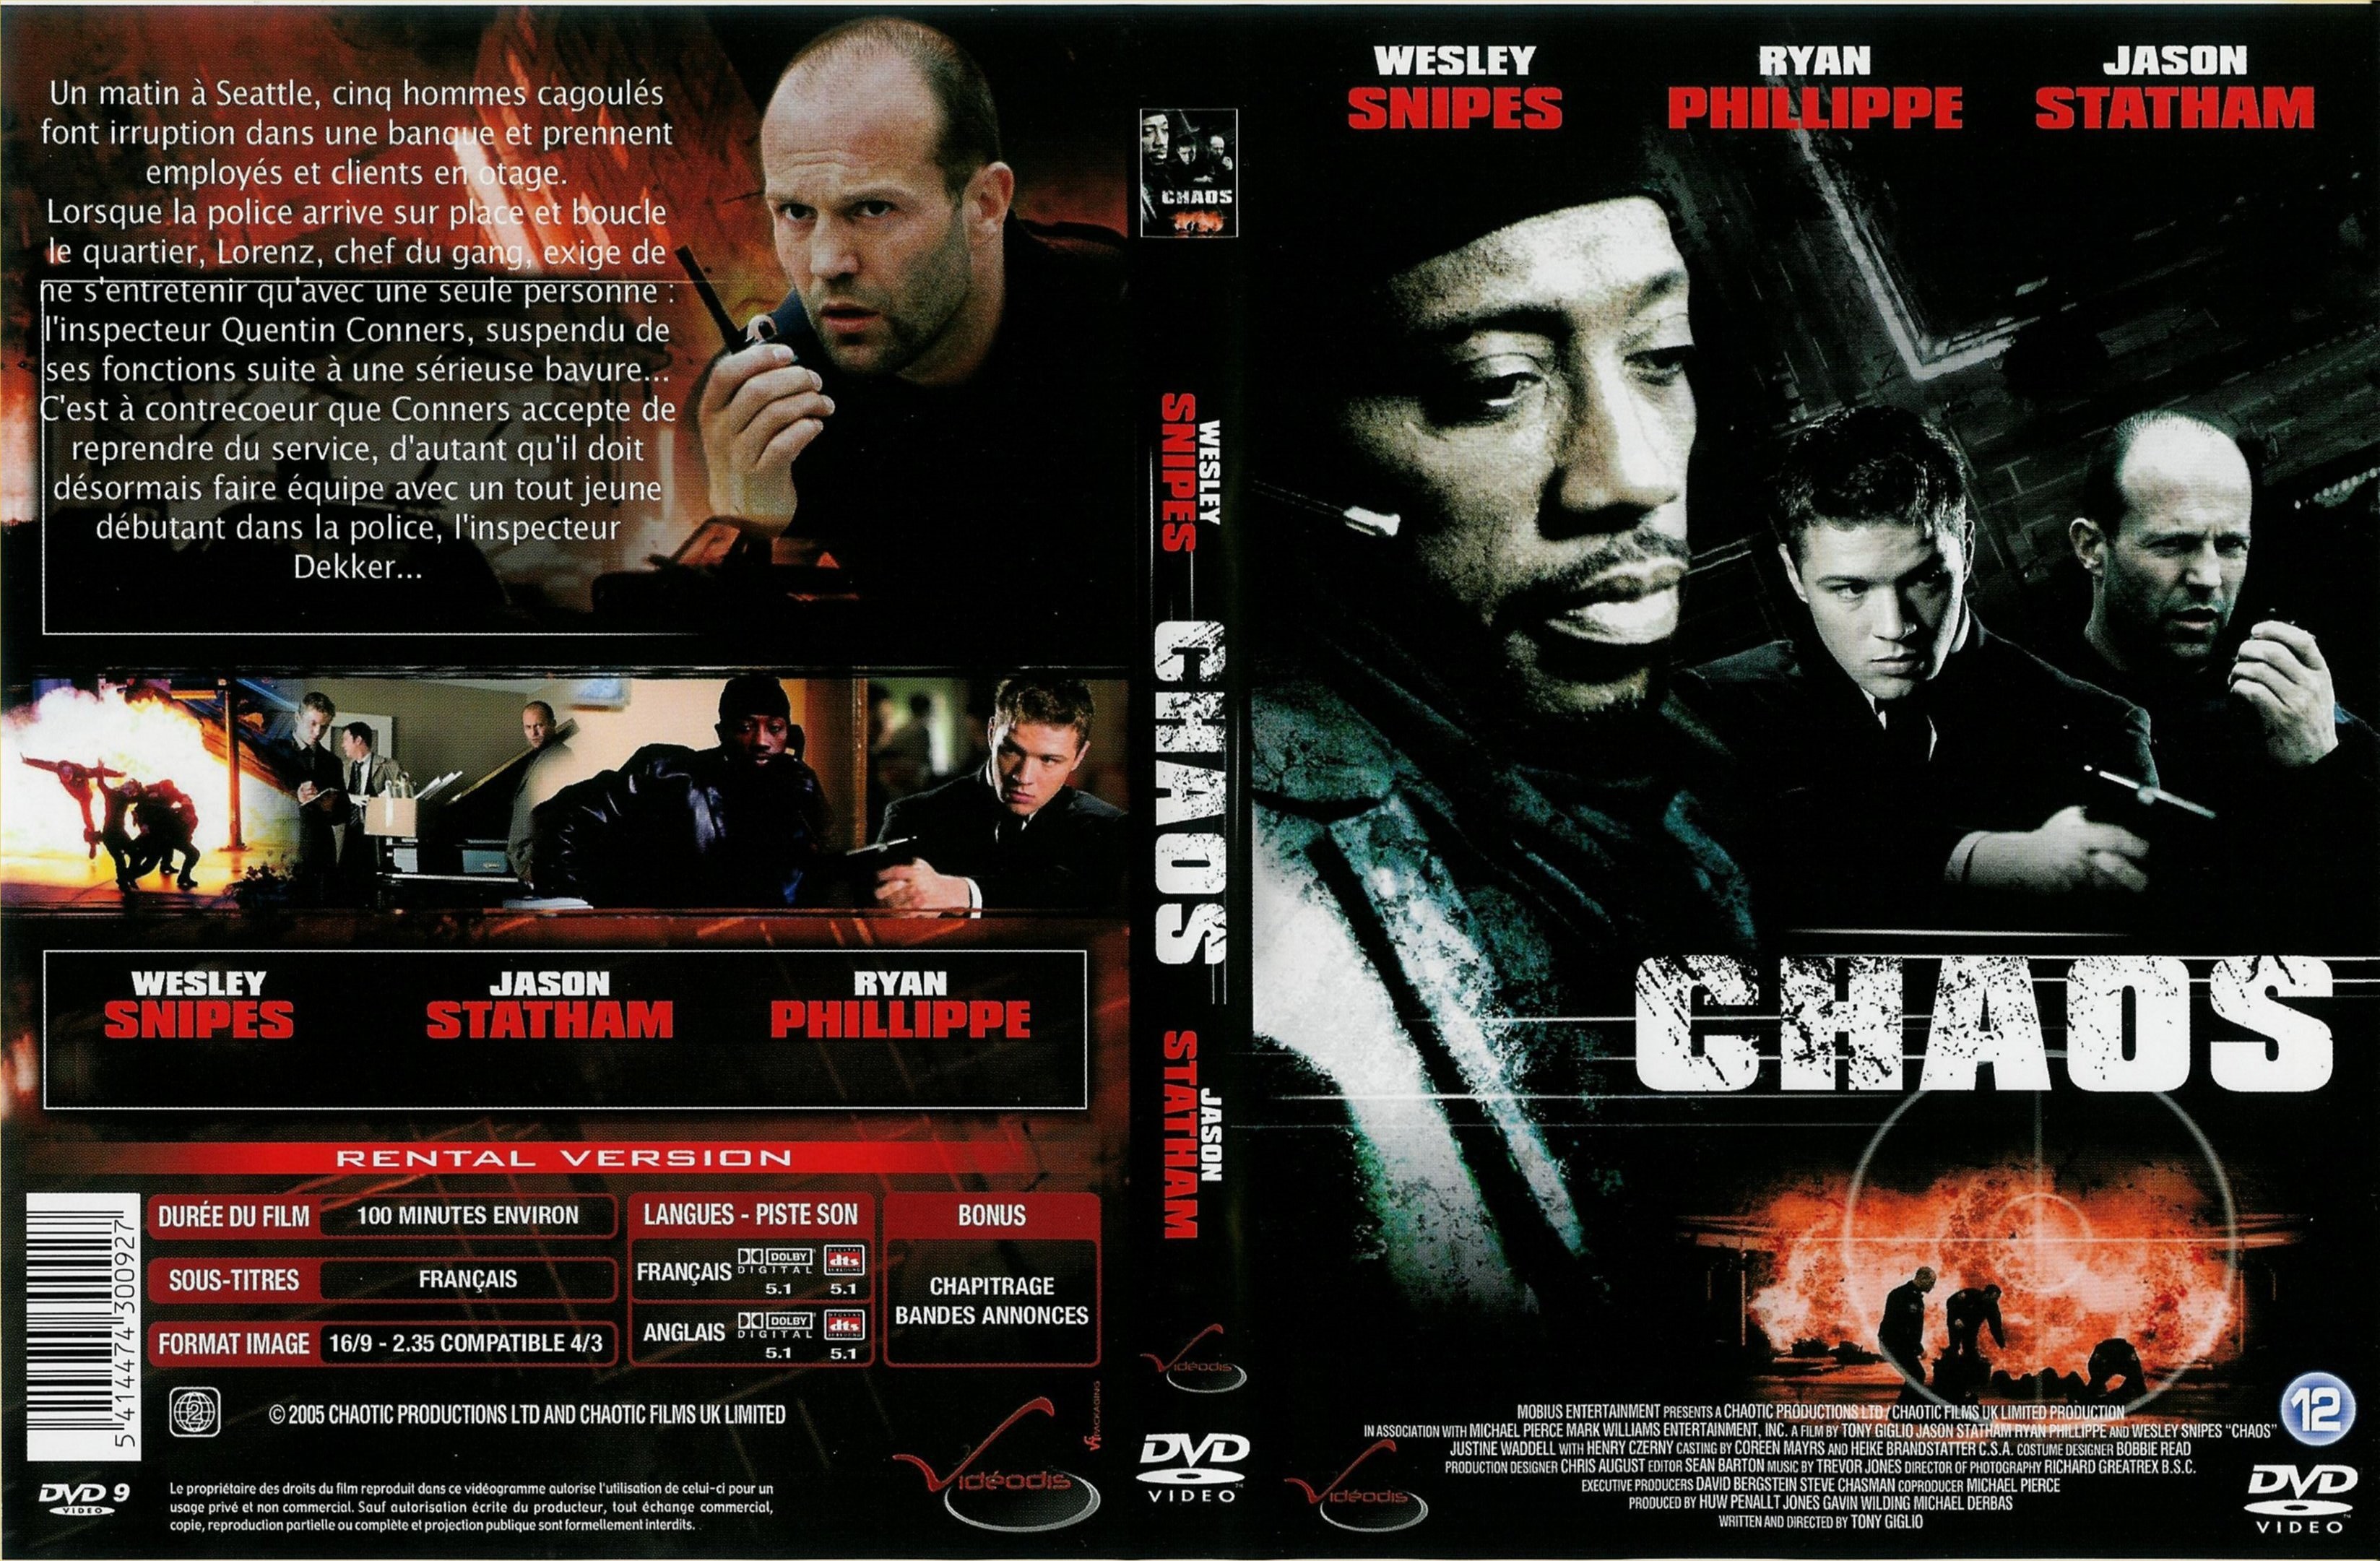 Jaquette DVD Chaos 2005 v2